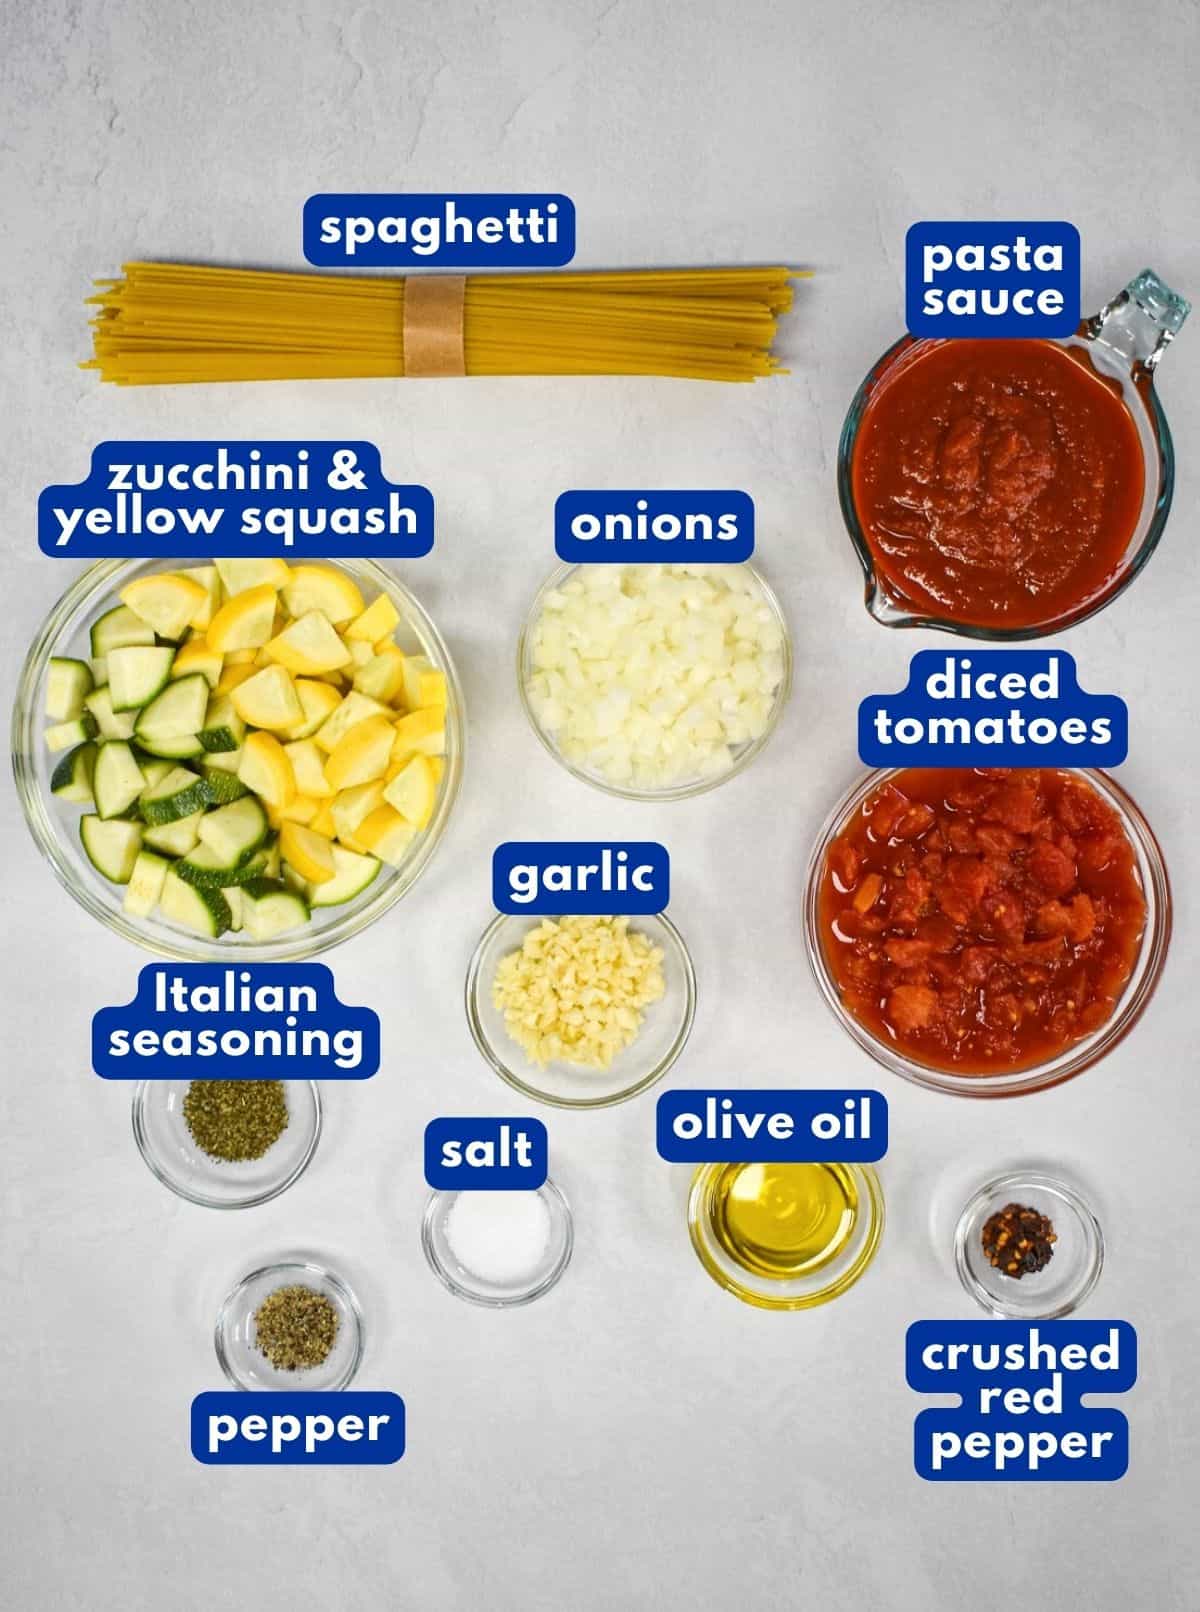 The ingredients for the squash pasta sauce prepped and arranged on a white table with each labeled with blue and white letters.